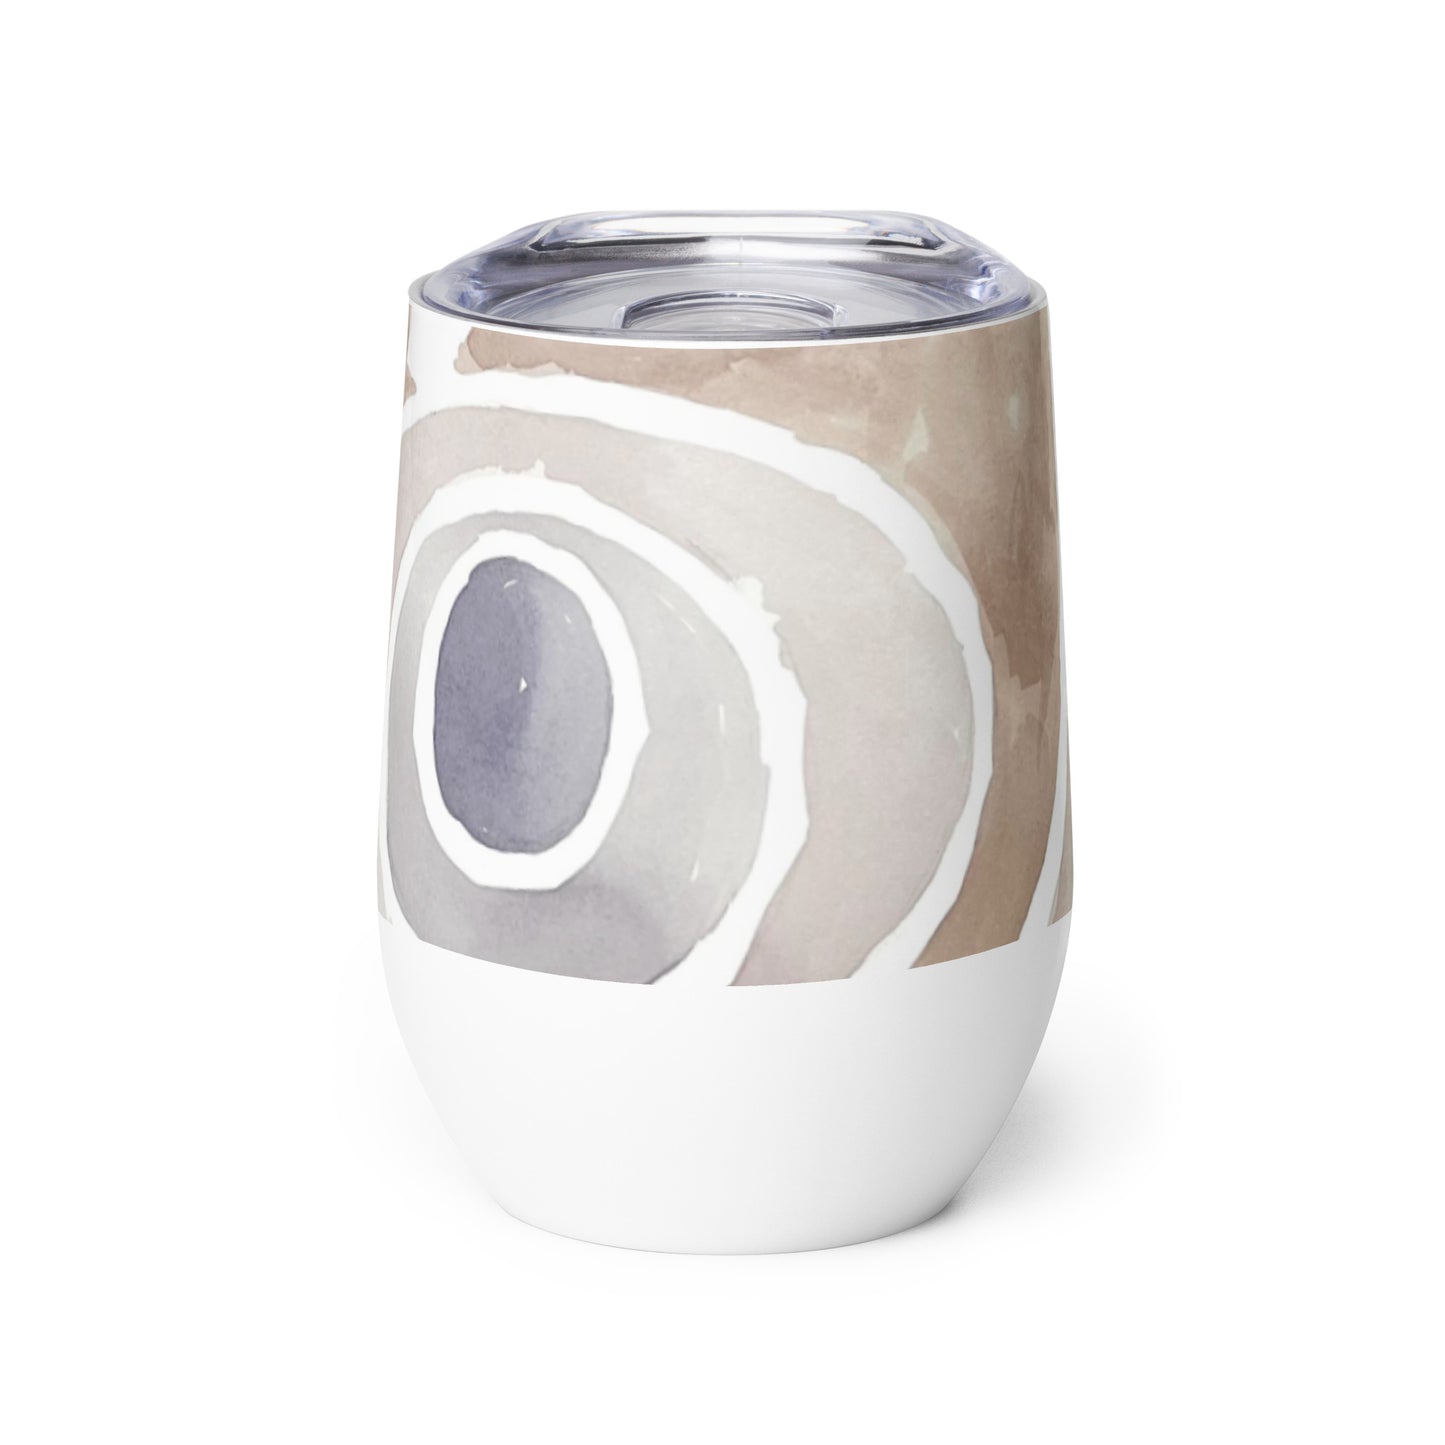 Body of Wine Collection: South African Swirl Wine tumbler